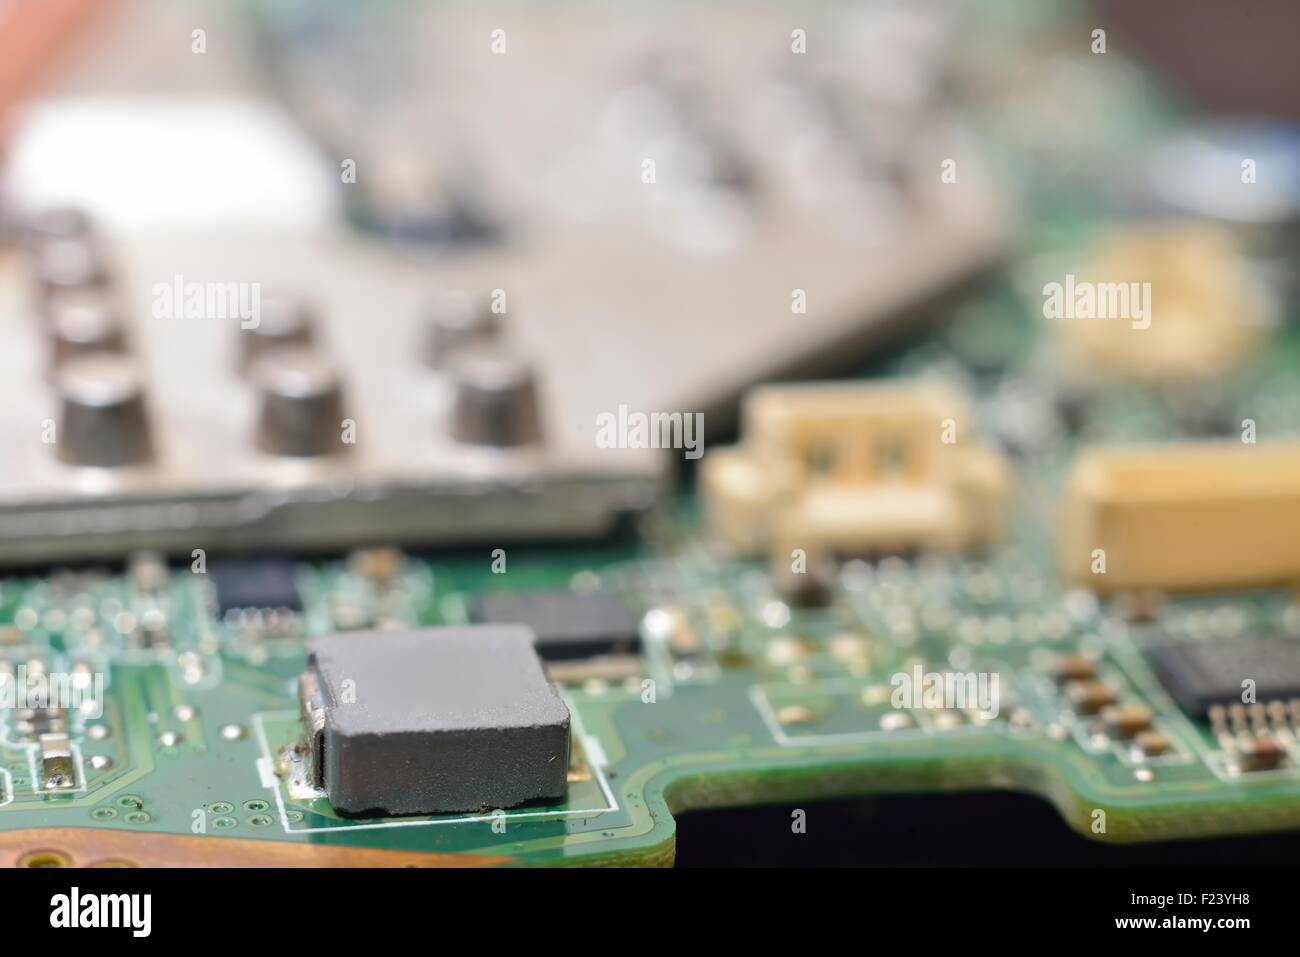 slots on matherboard (microcircuit) with microchip and radiators Stock Photo